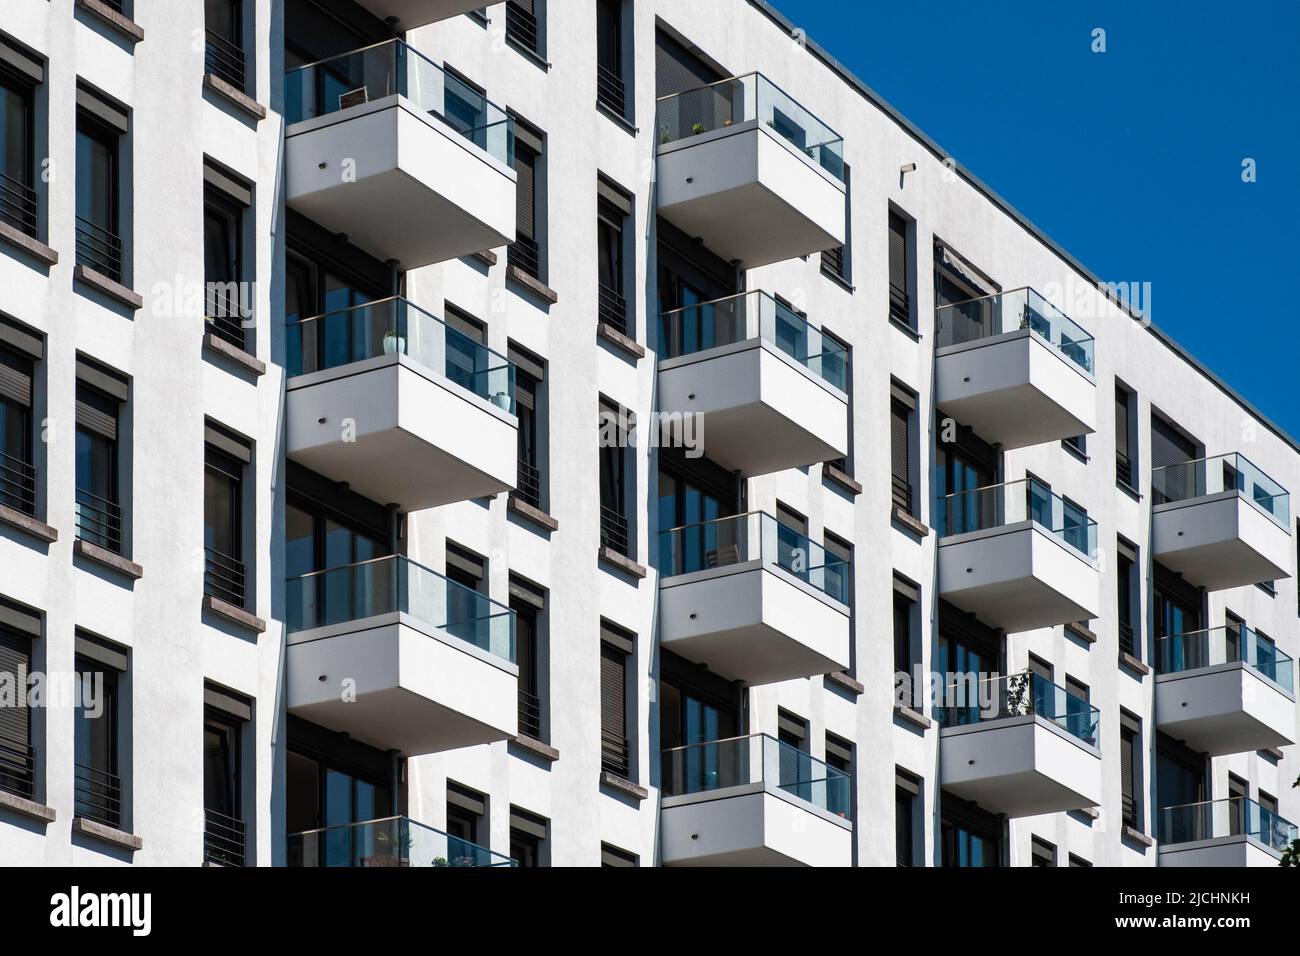 balconies on apartment building facade, residential real estate Stock Photo